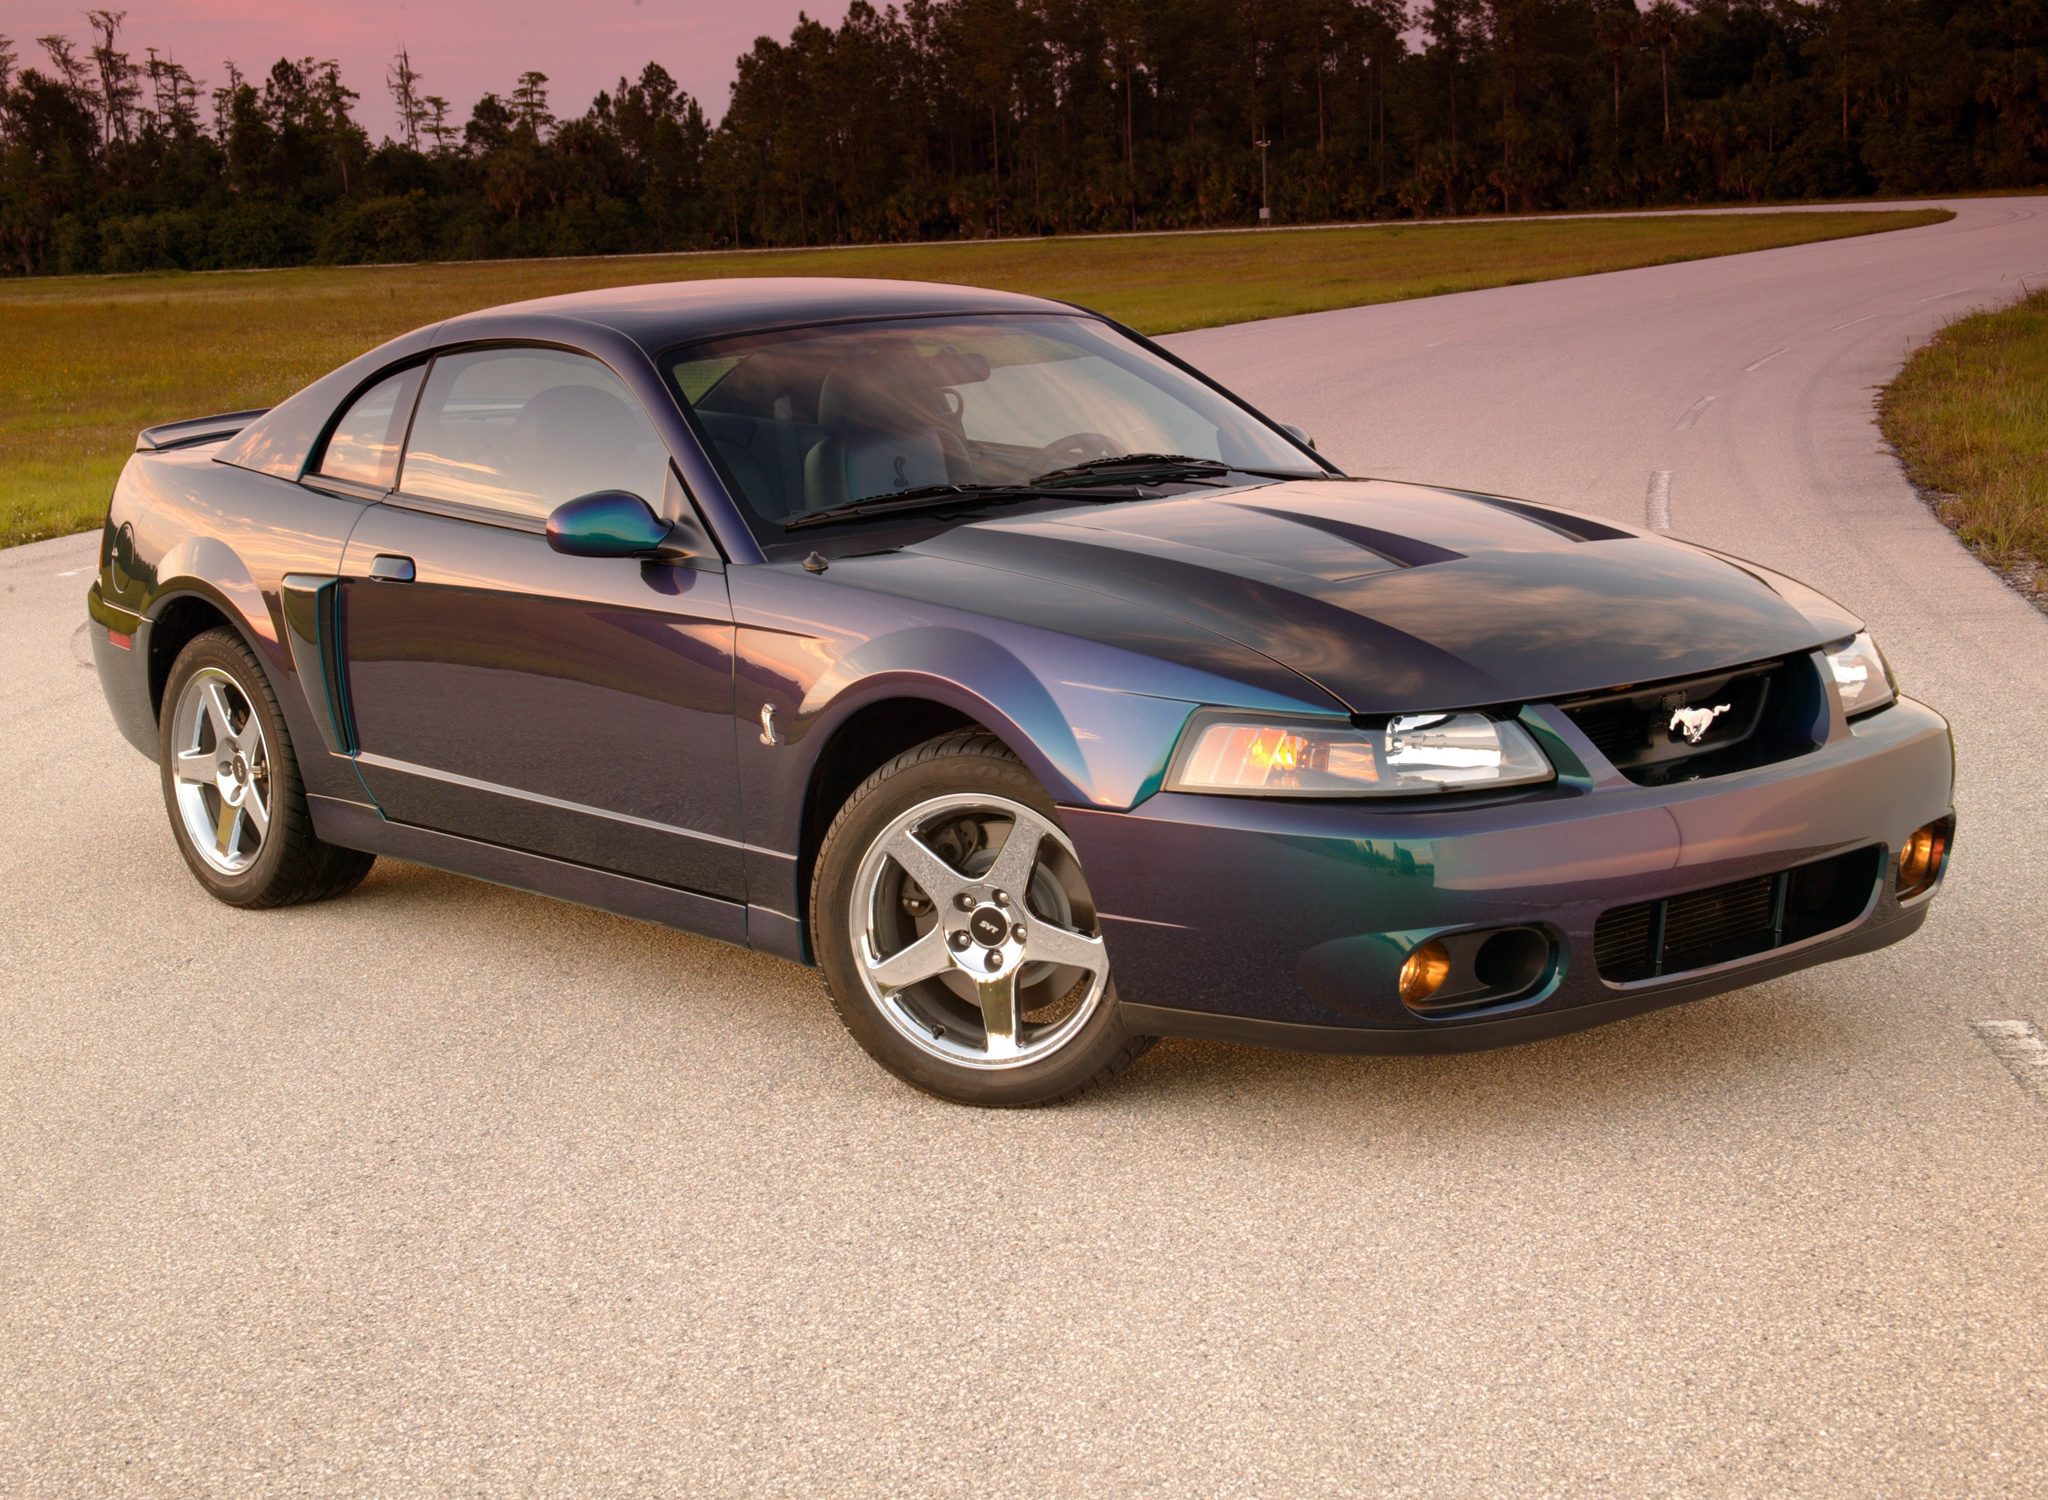 Mustang Of The Day: 2004 Ford Mustang SVT Cobra Mystichrome